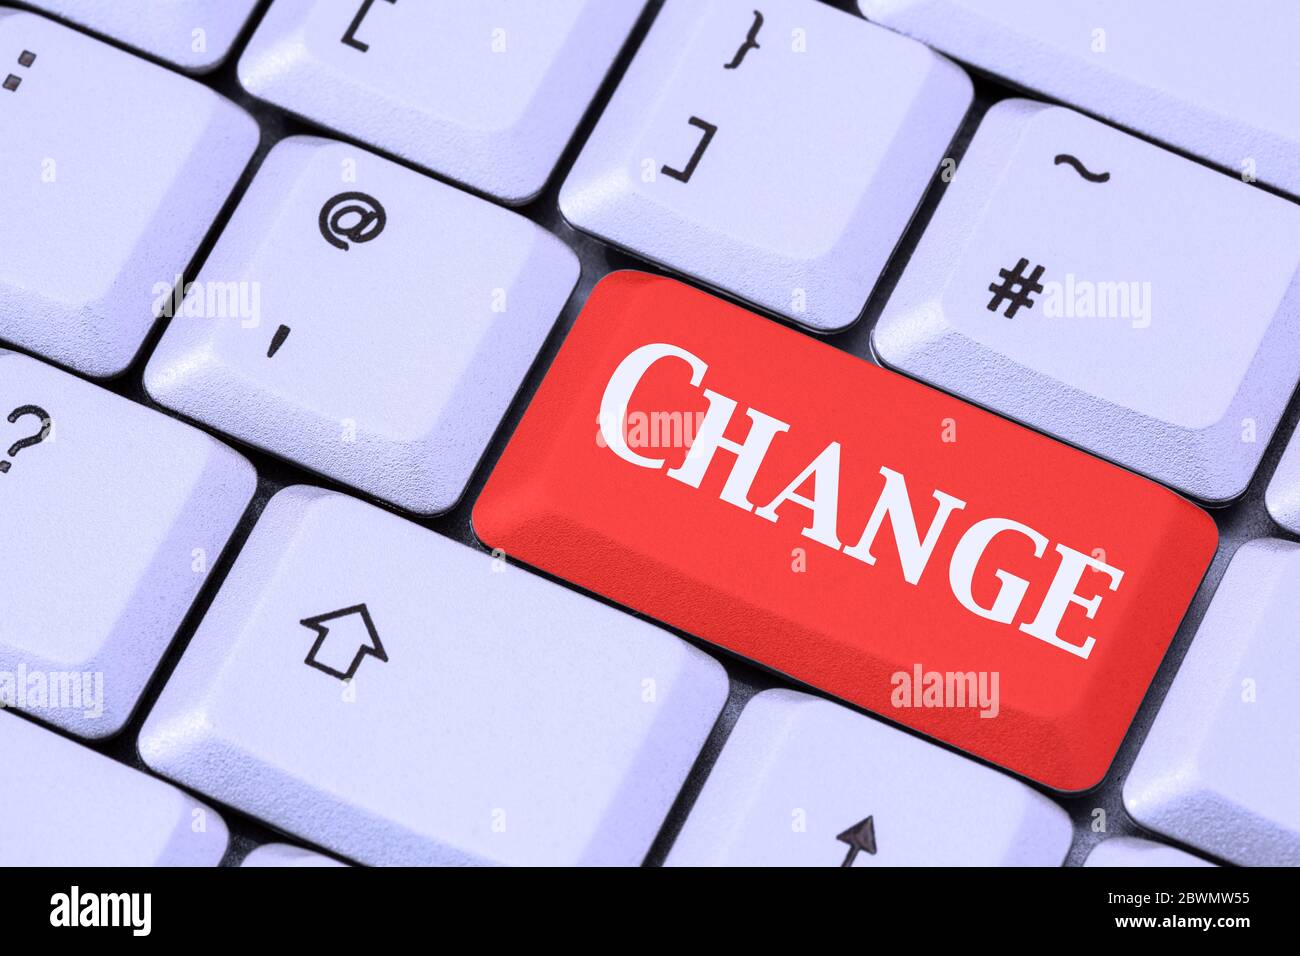 A keyboard with the word CHANGE on a red enter key to illustrate alter making future changes concept. England, UK, Britain Stock Photo